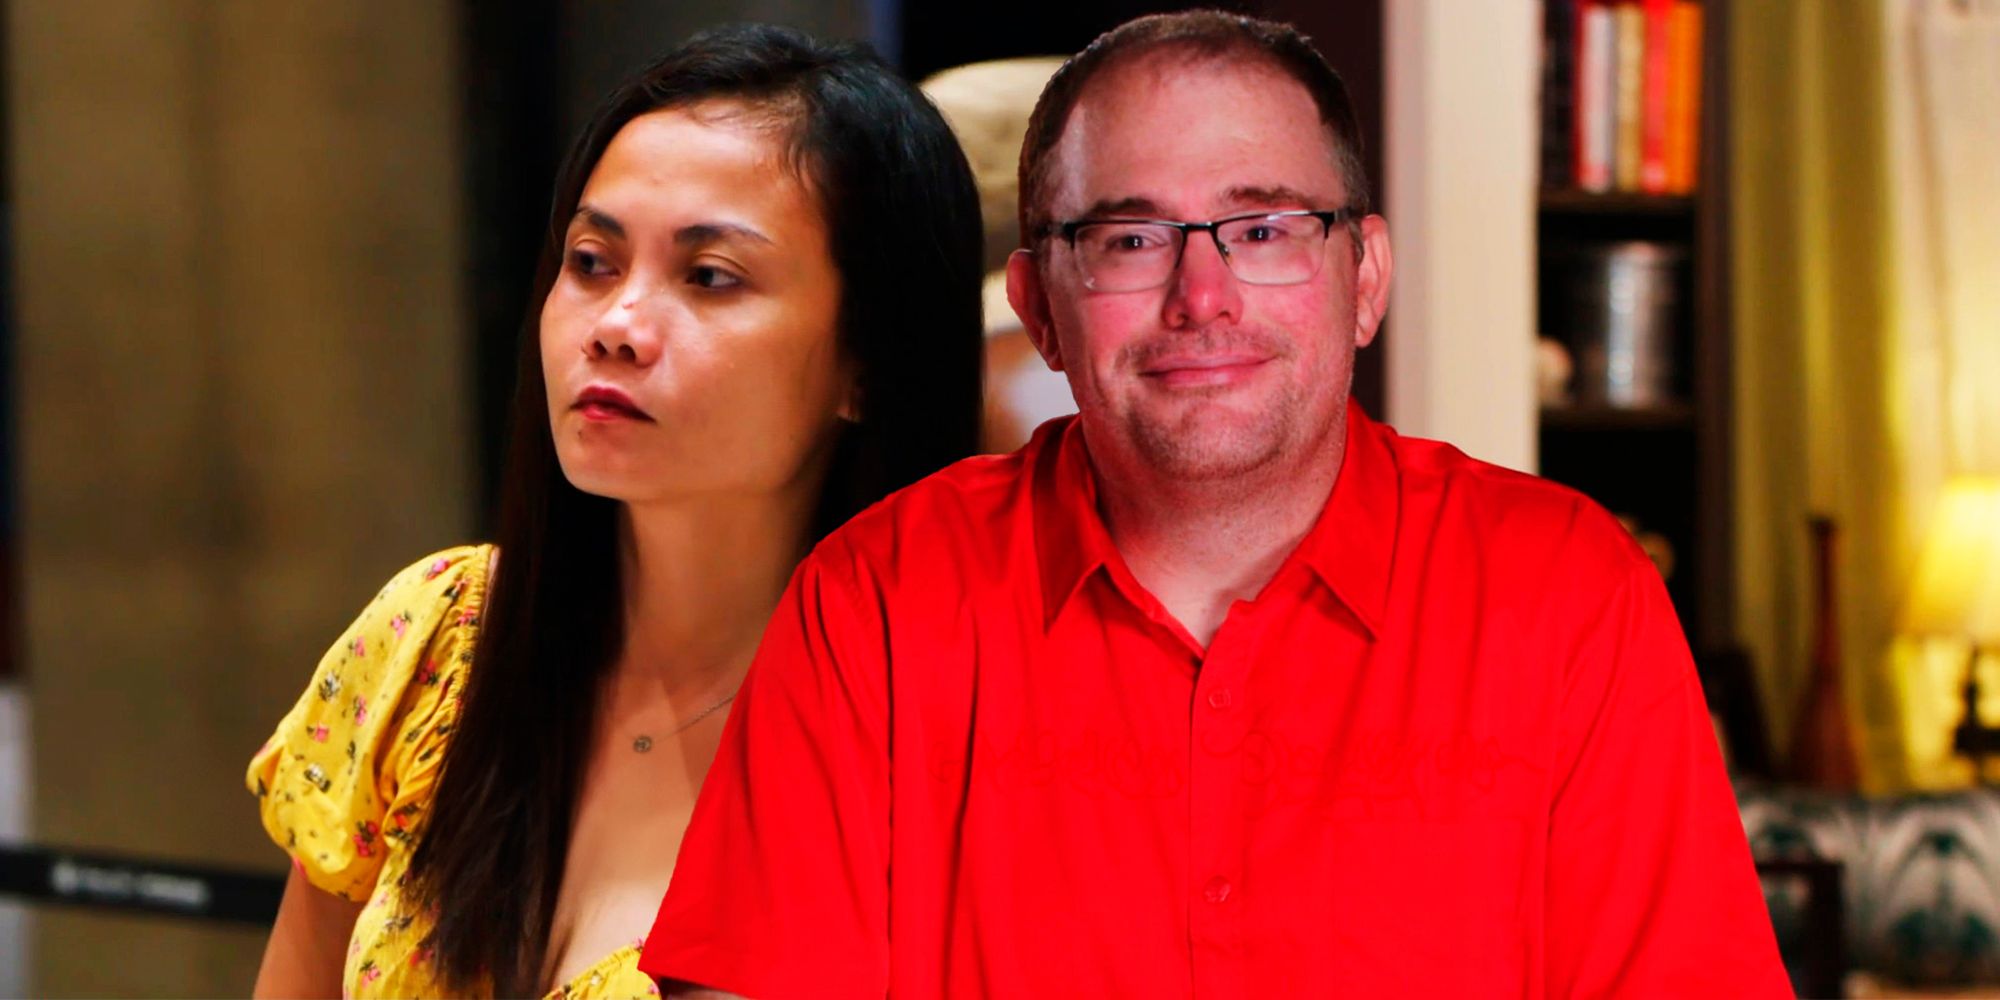 David and Shiela looking series in still images from 90 Day Fiance: B90